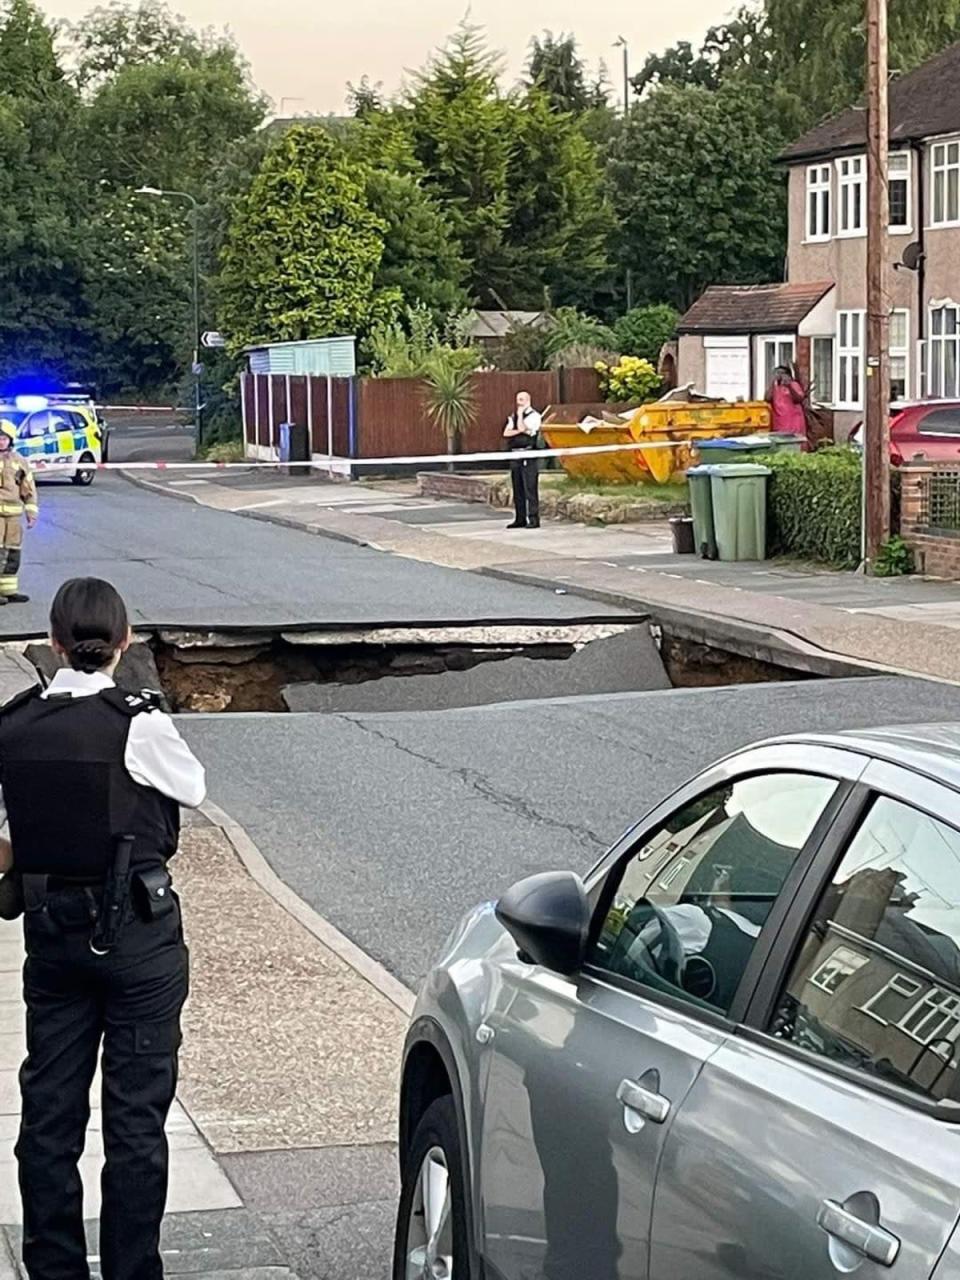 Liam Edwards, 25, who lives on Leysdown Avenue, said he heard a “massive thud” as part of the road next to his collapsed. (Liam Edwards/PA)